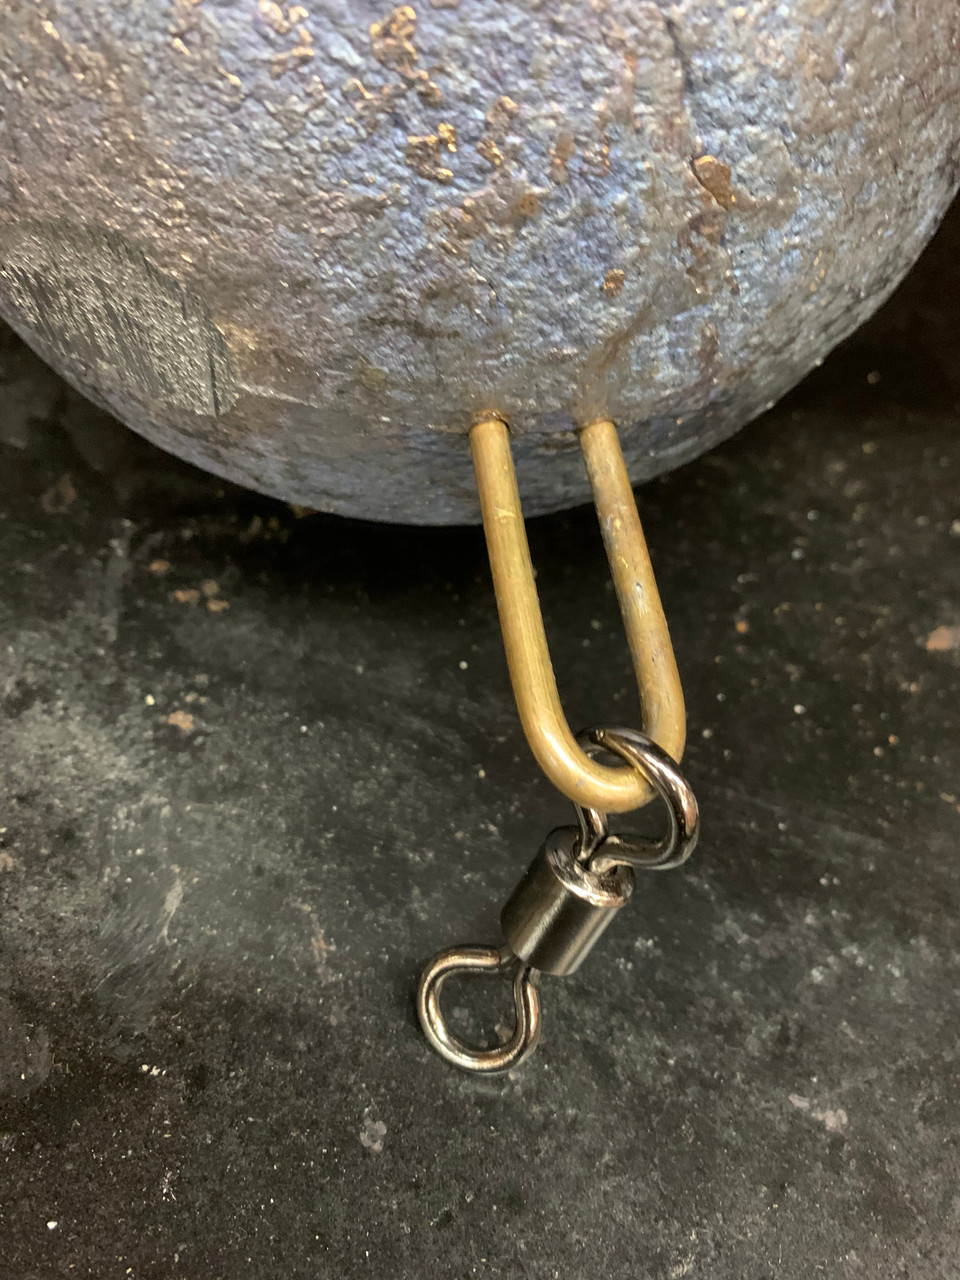 How to make cannon ball weights for drift fishing for salmon. plus